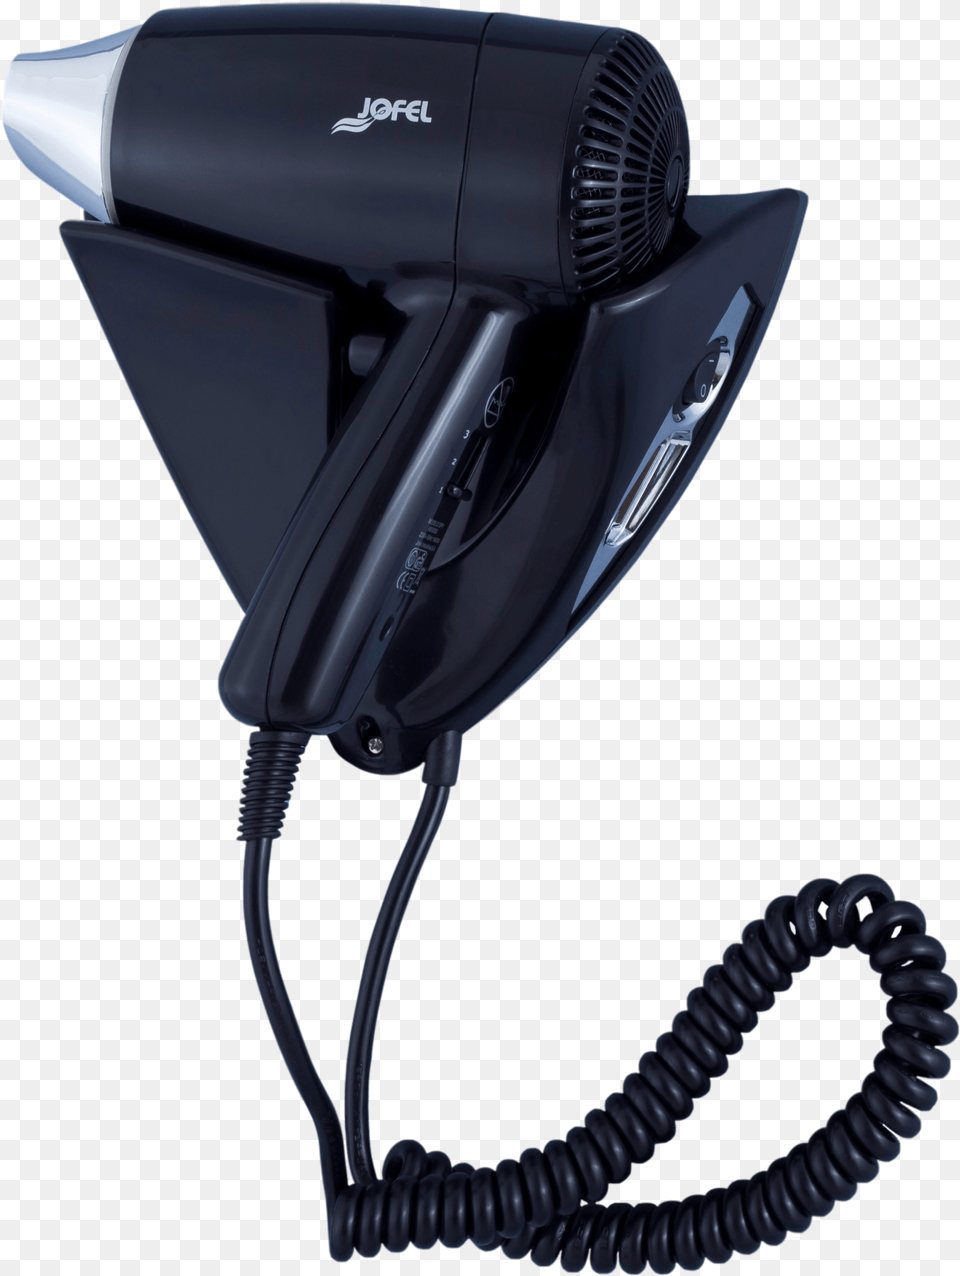 Image Hair Dryer, Appliance, Device, Electrical Device, Blow Dryer Free Png Download